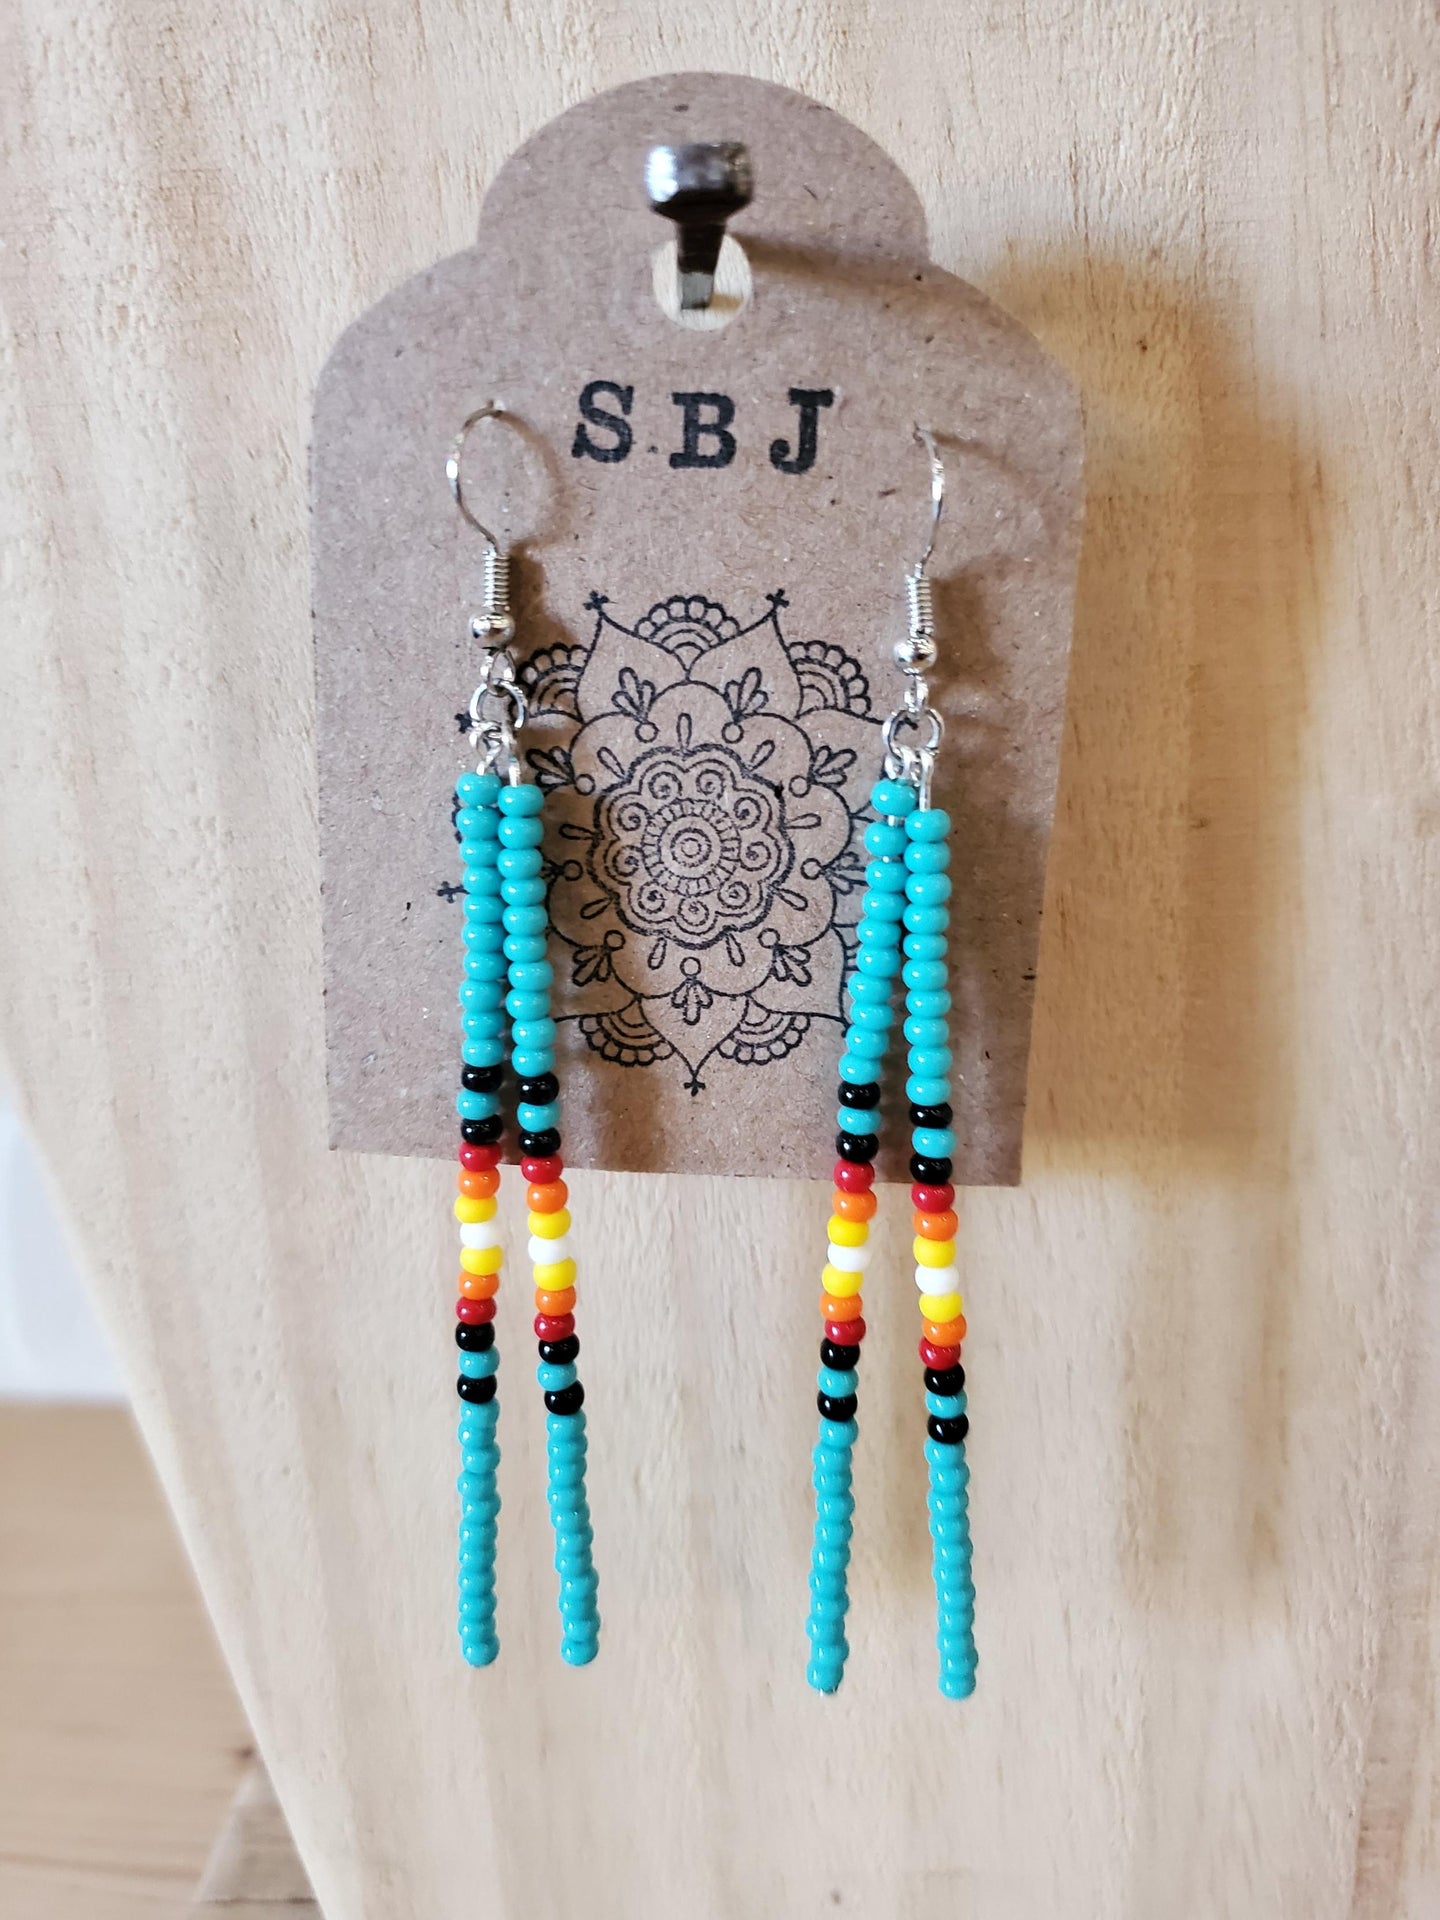 Still Belted Designs - Handcrafted Beaded Dangle Earrings